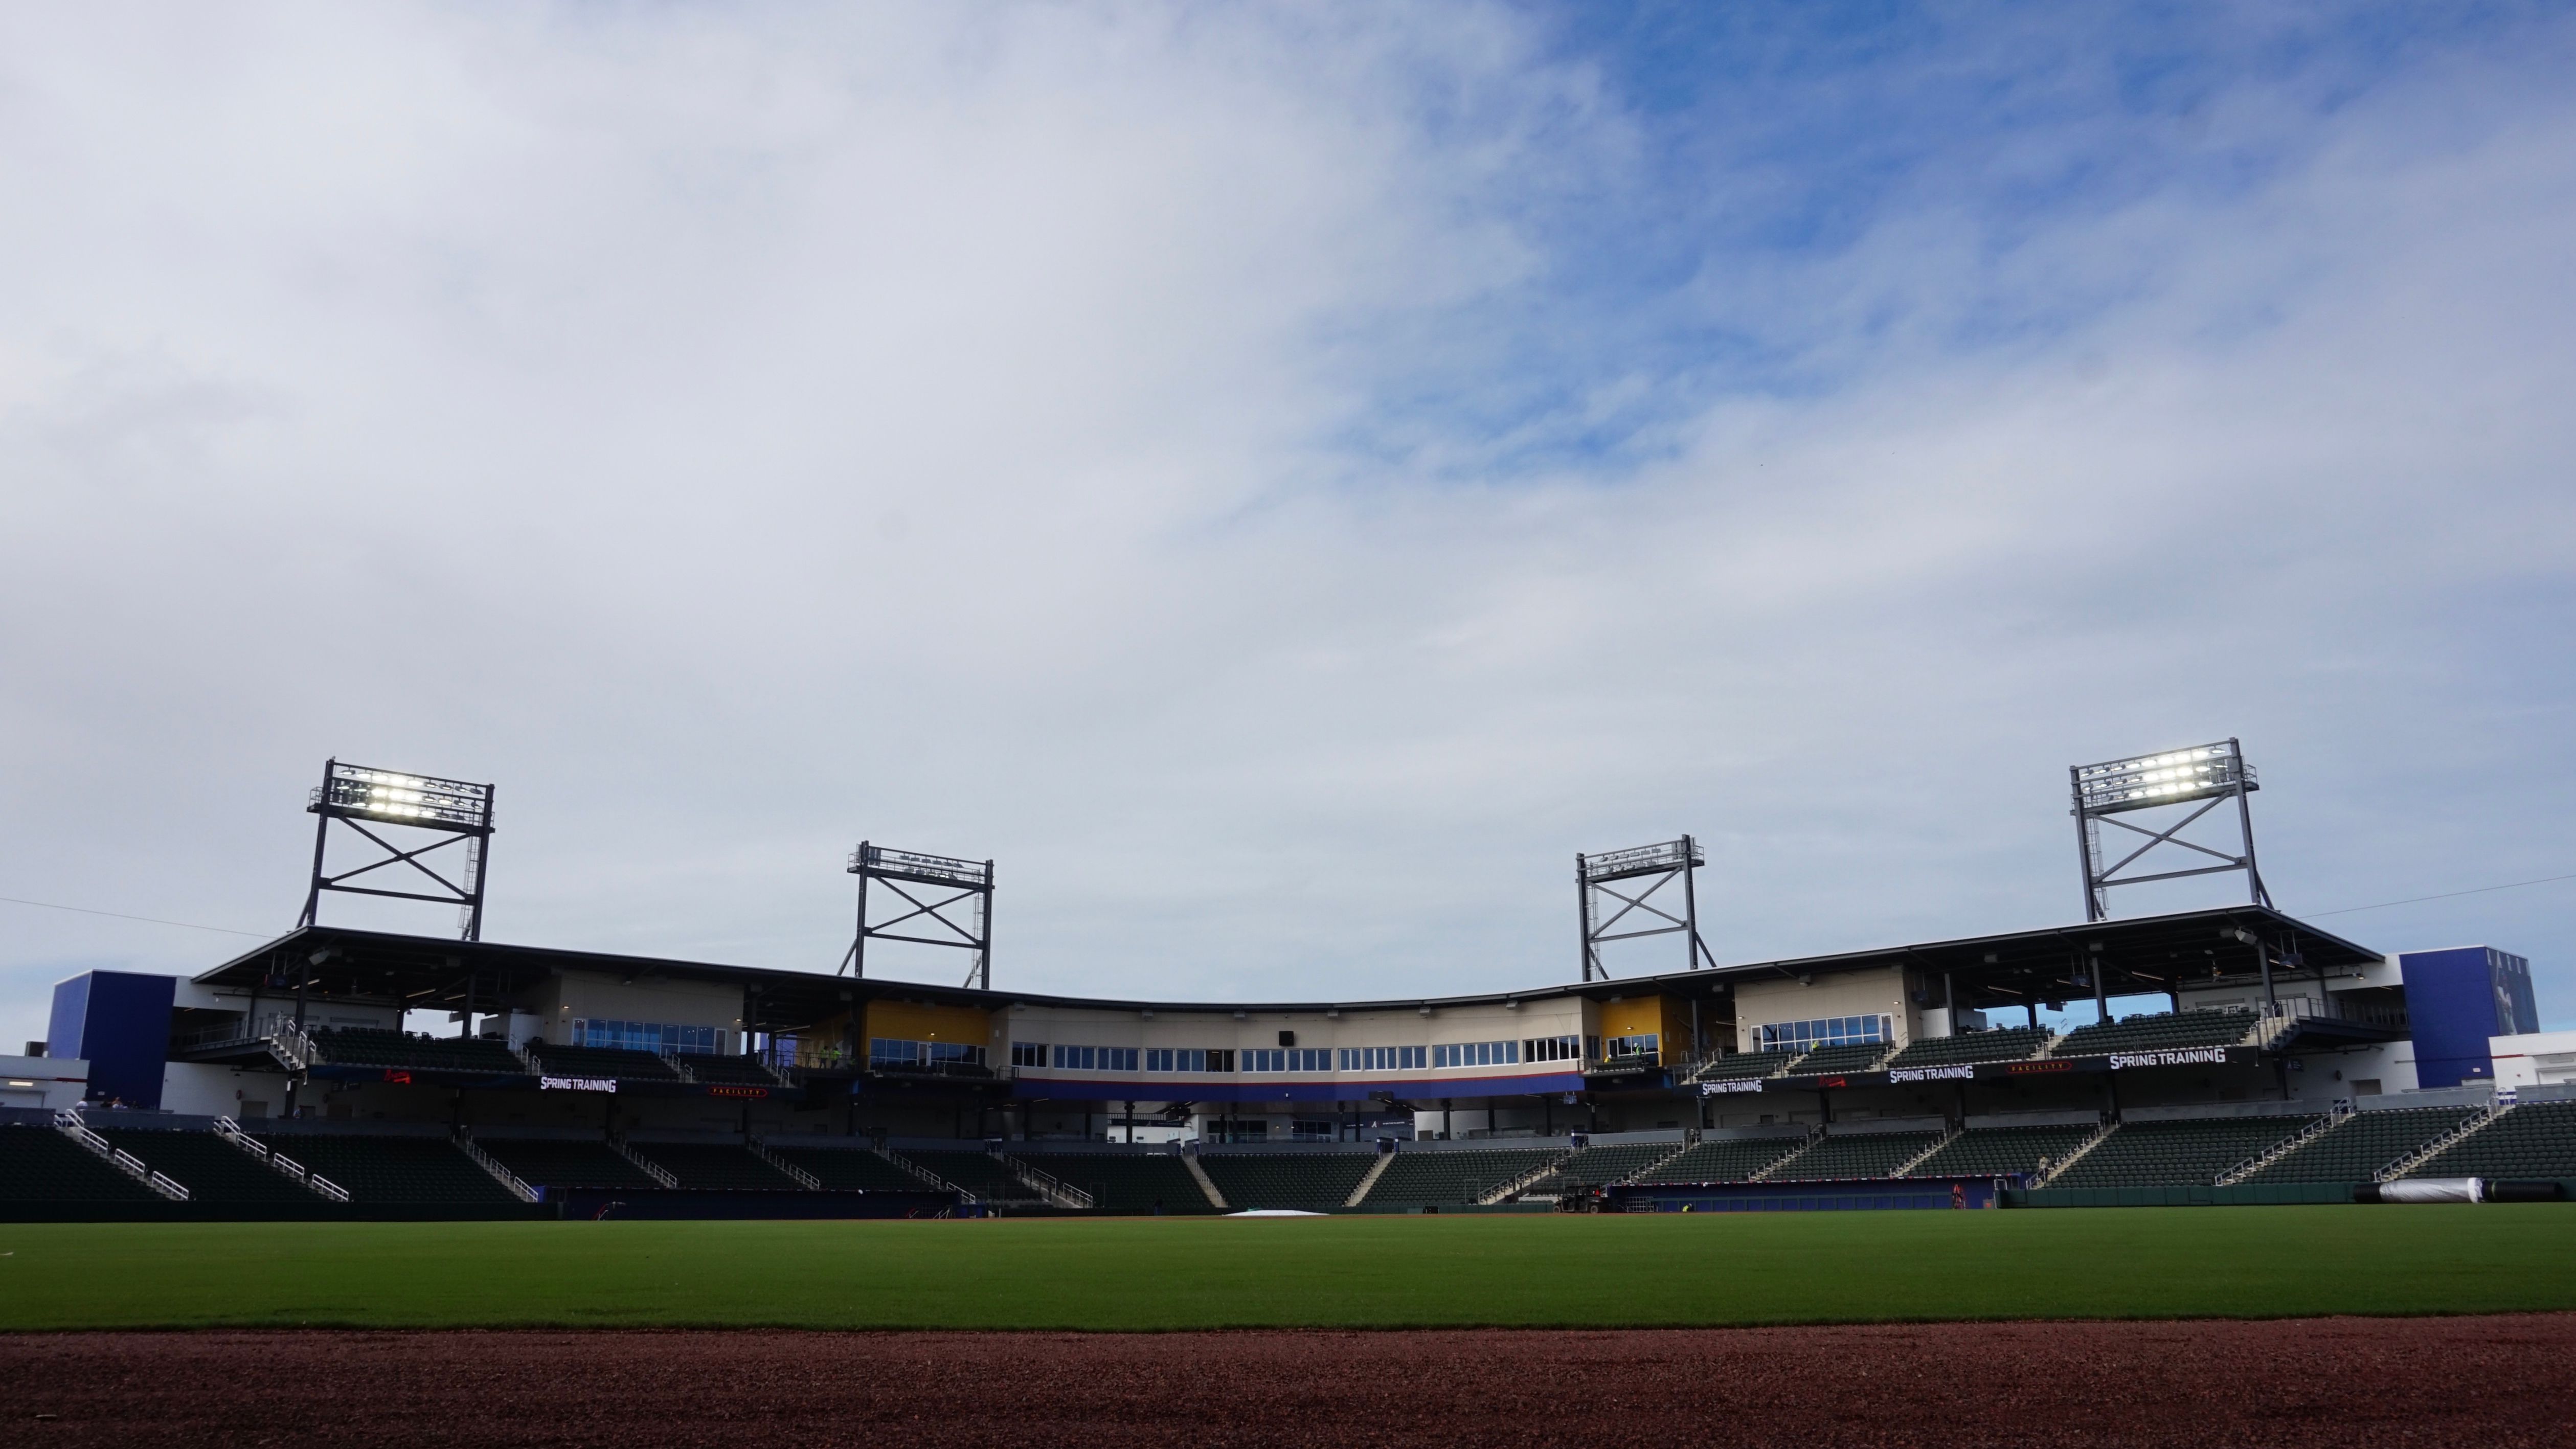 Ballpark Preview: Braves New Spring Training Complex, CoolToday